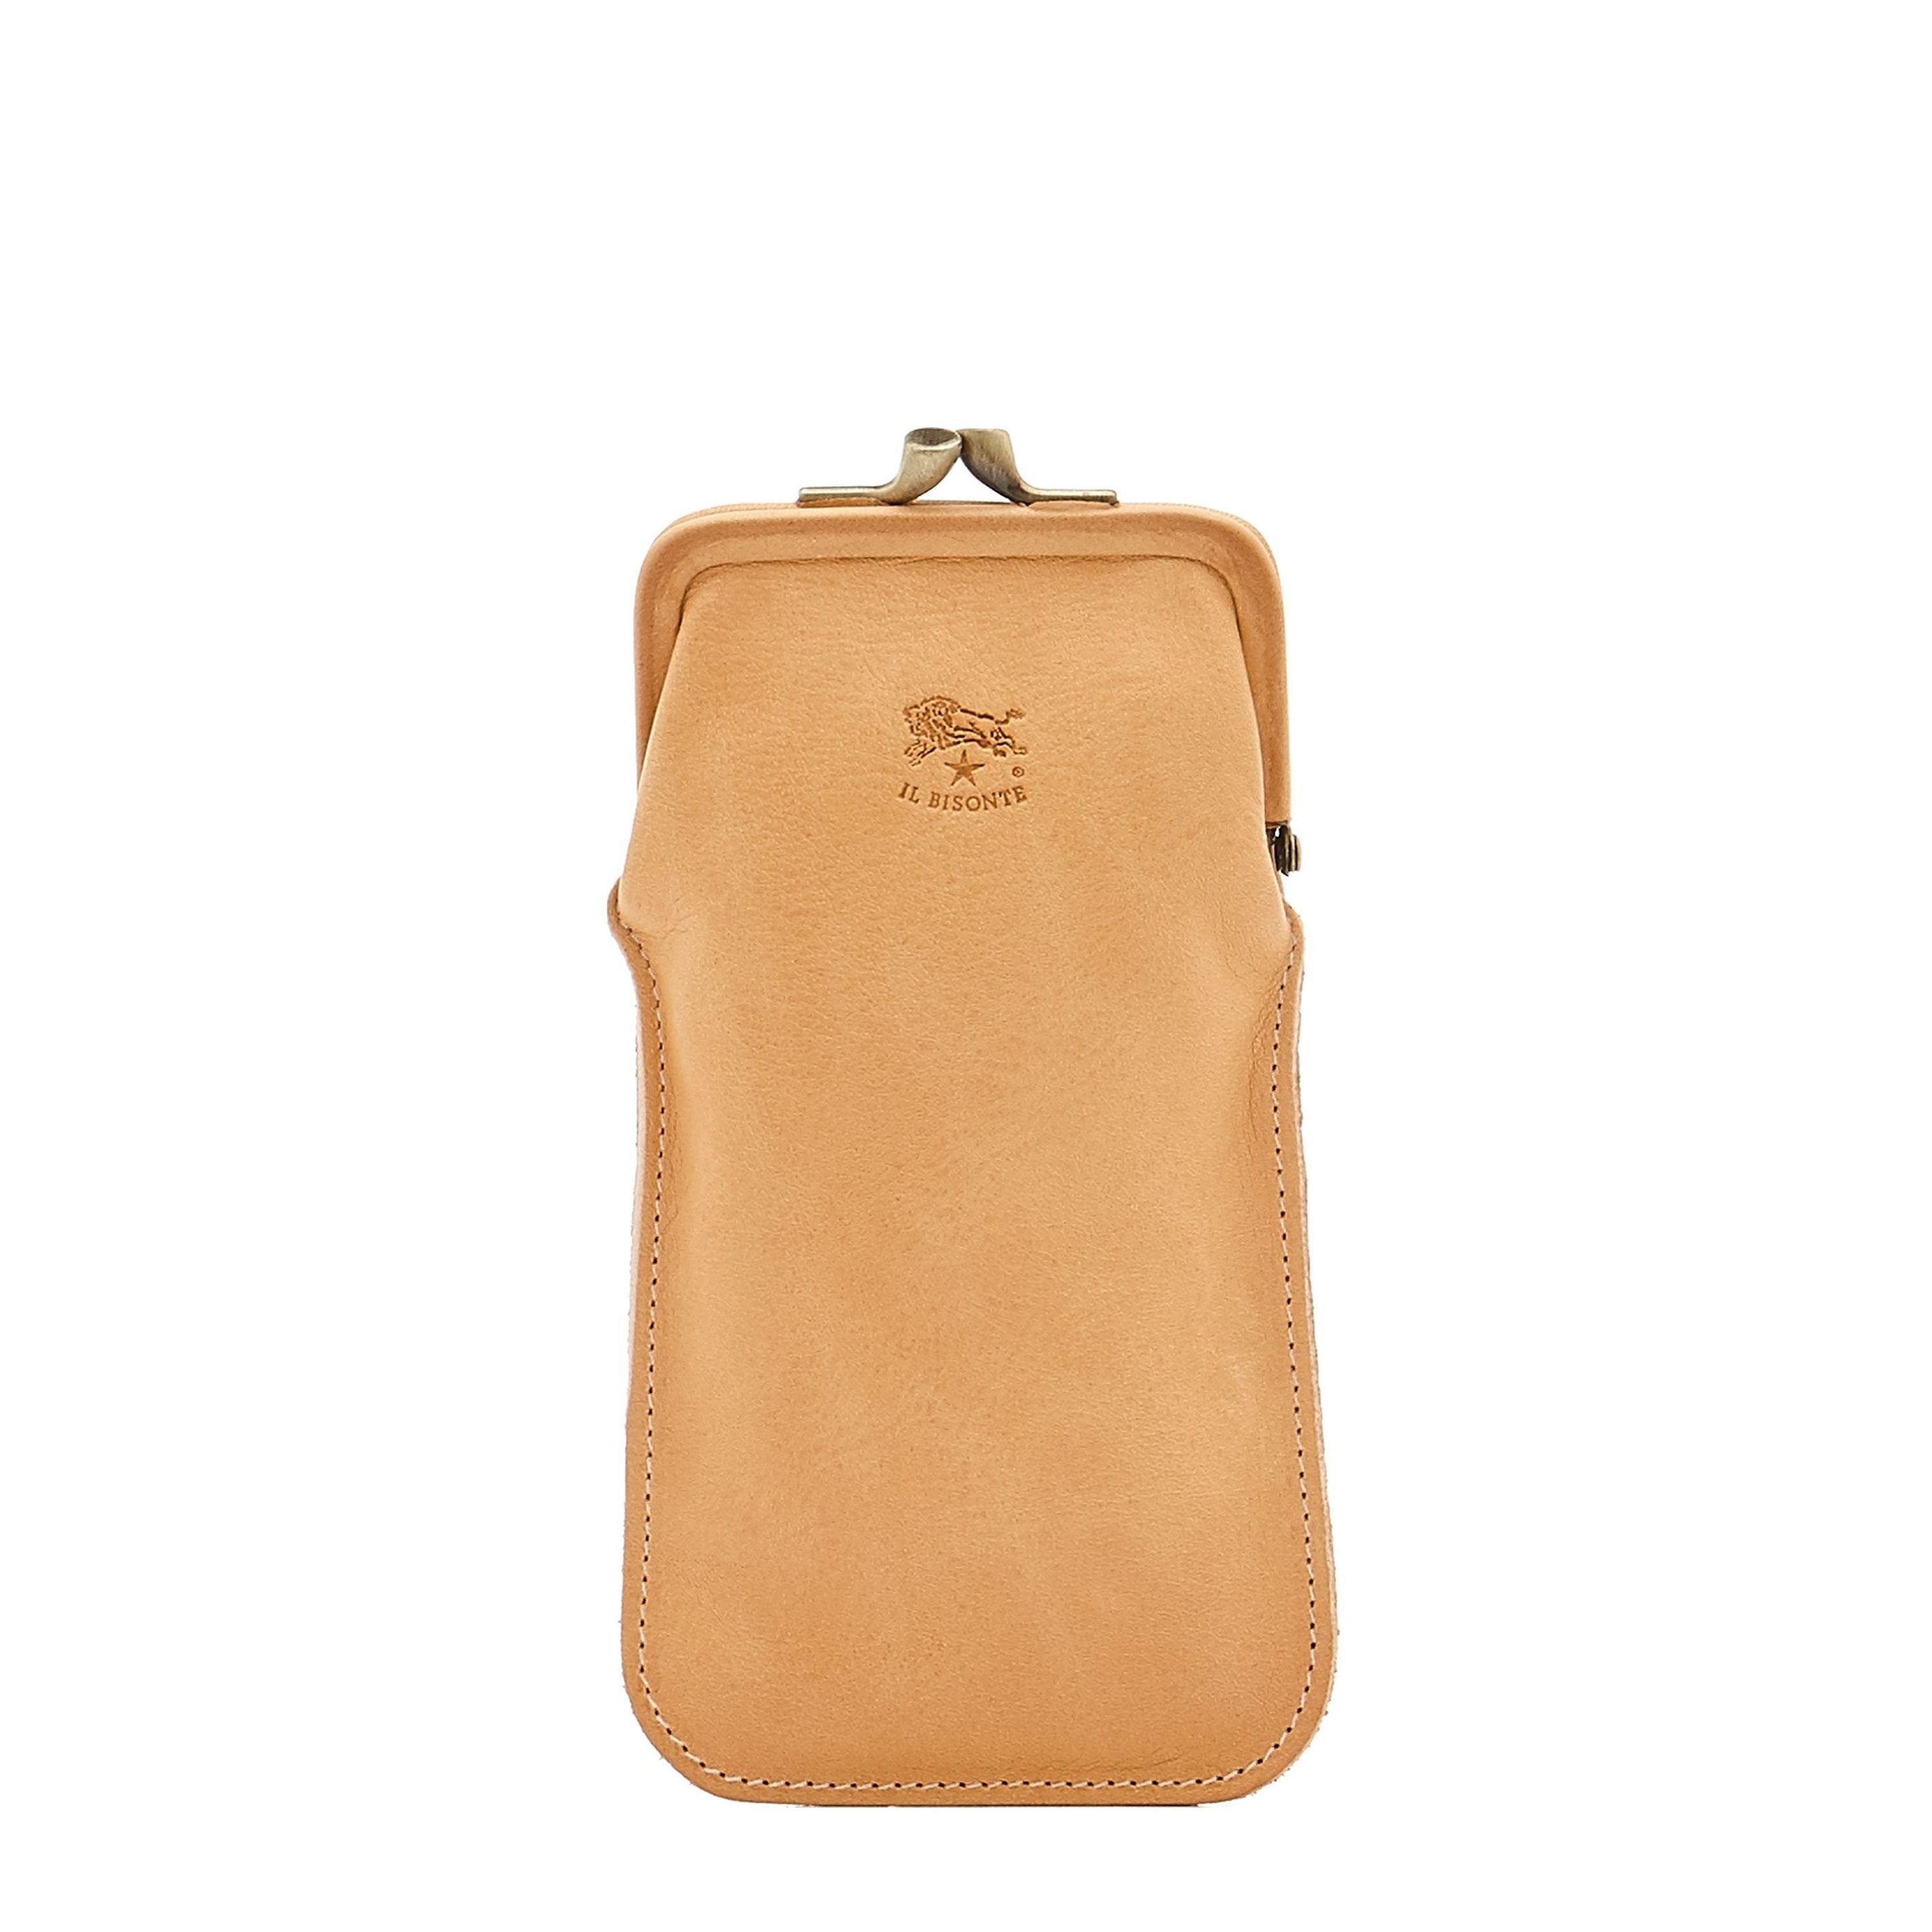 Case in calf leather color natural